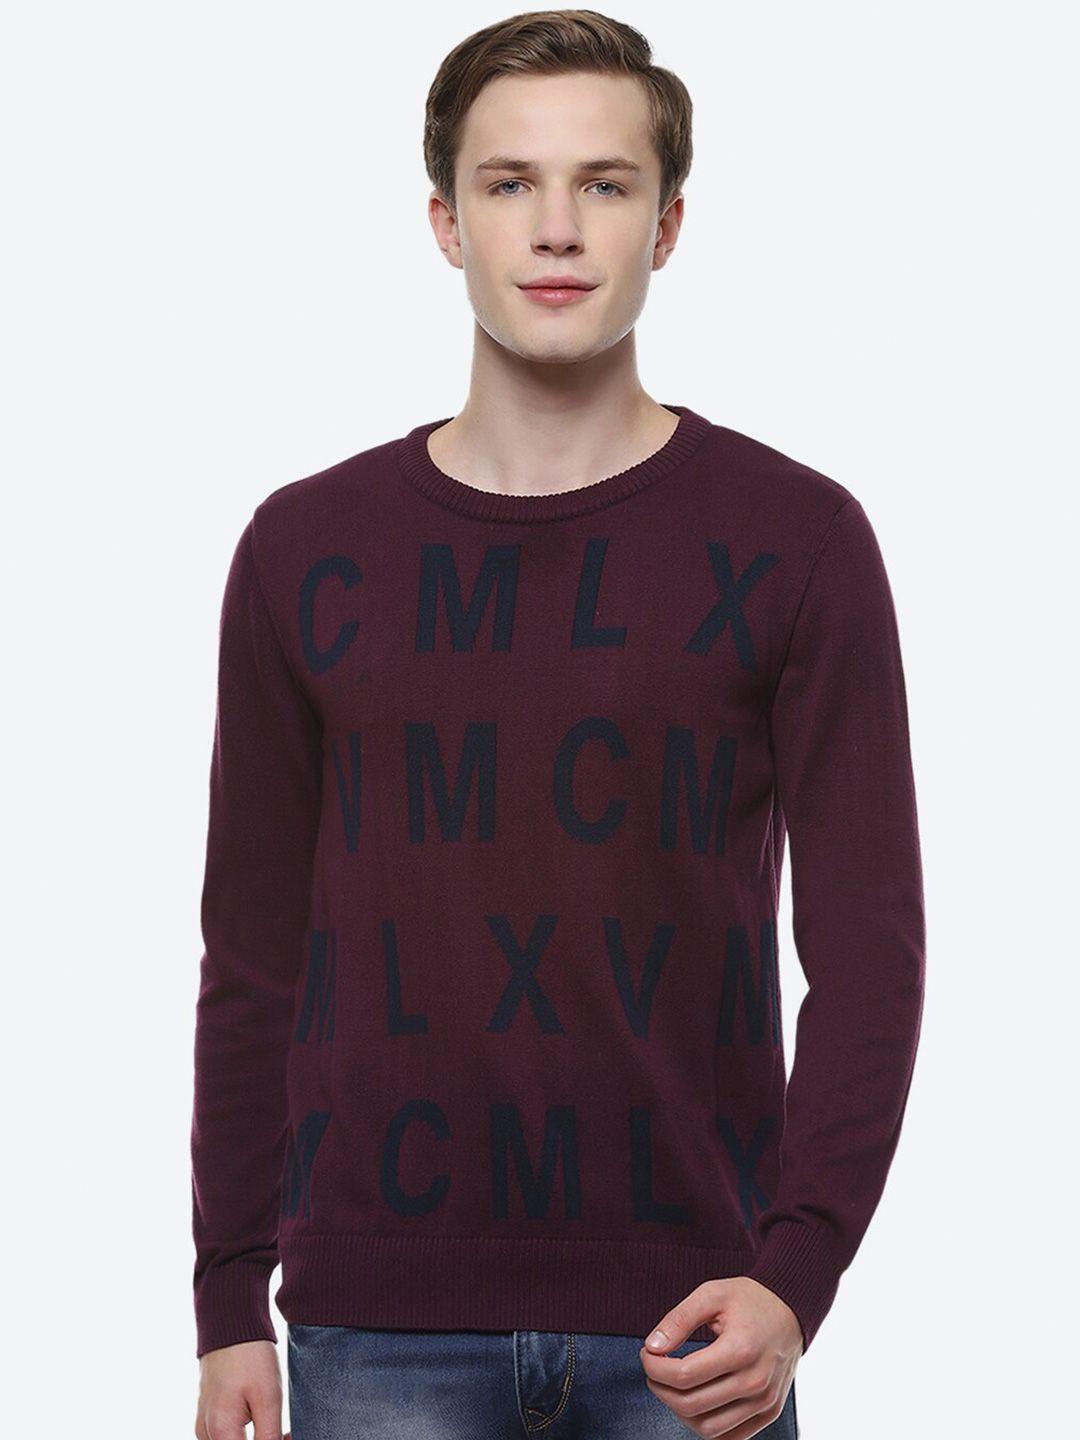 2bme typography printed pullover cotton sweaters